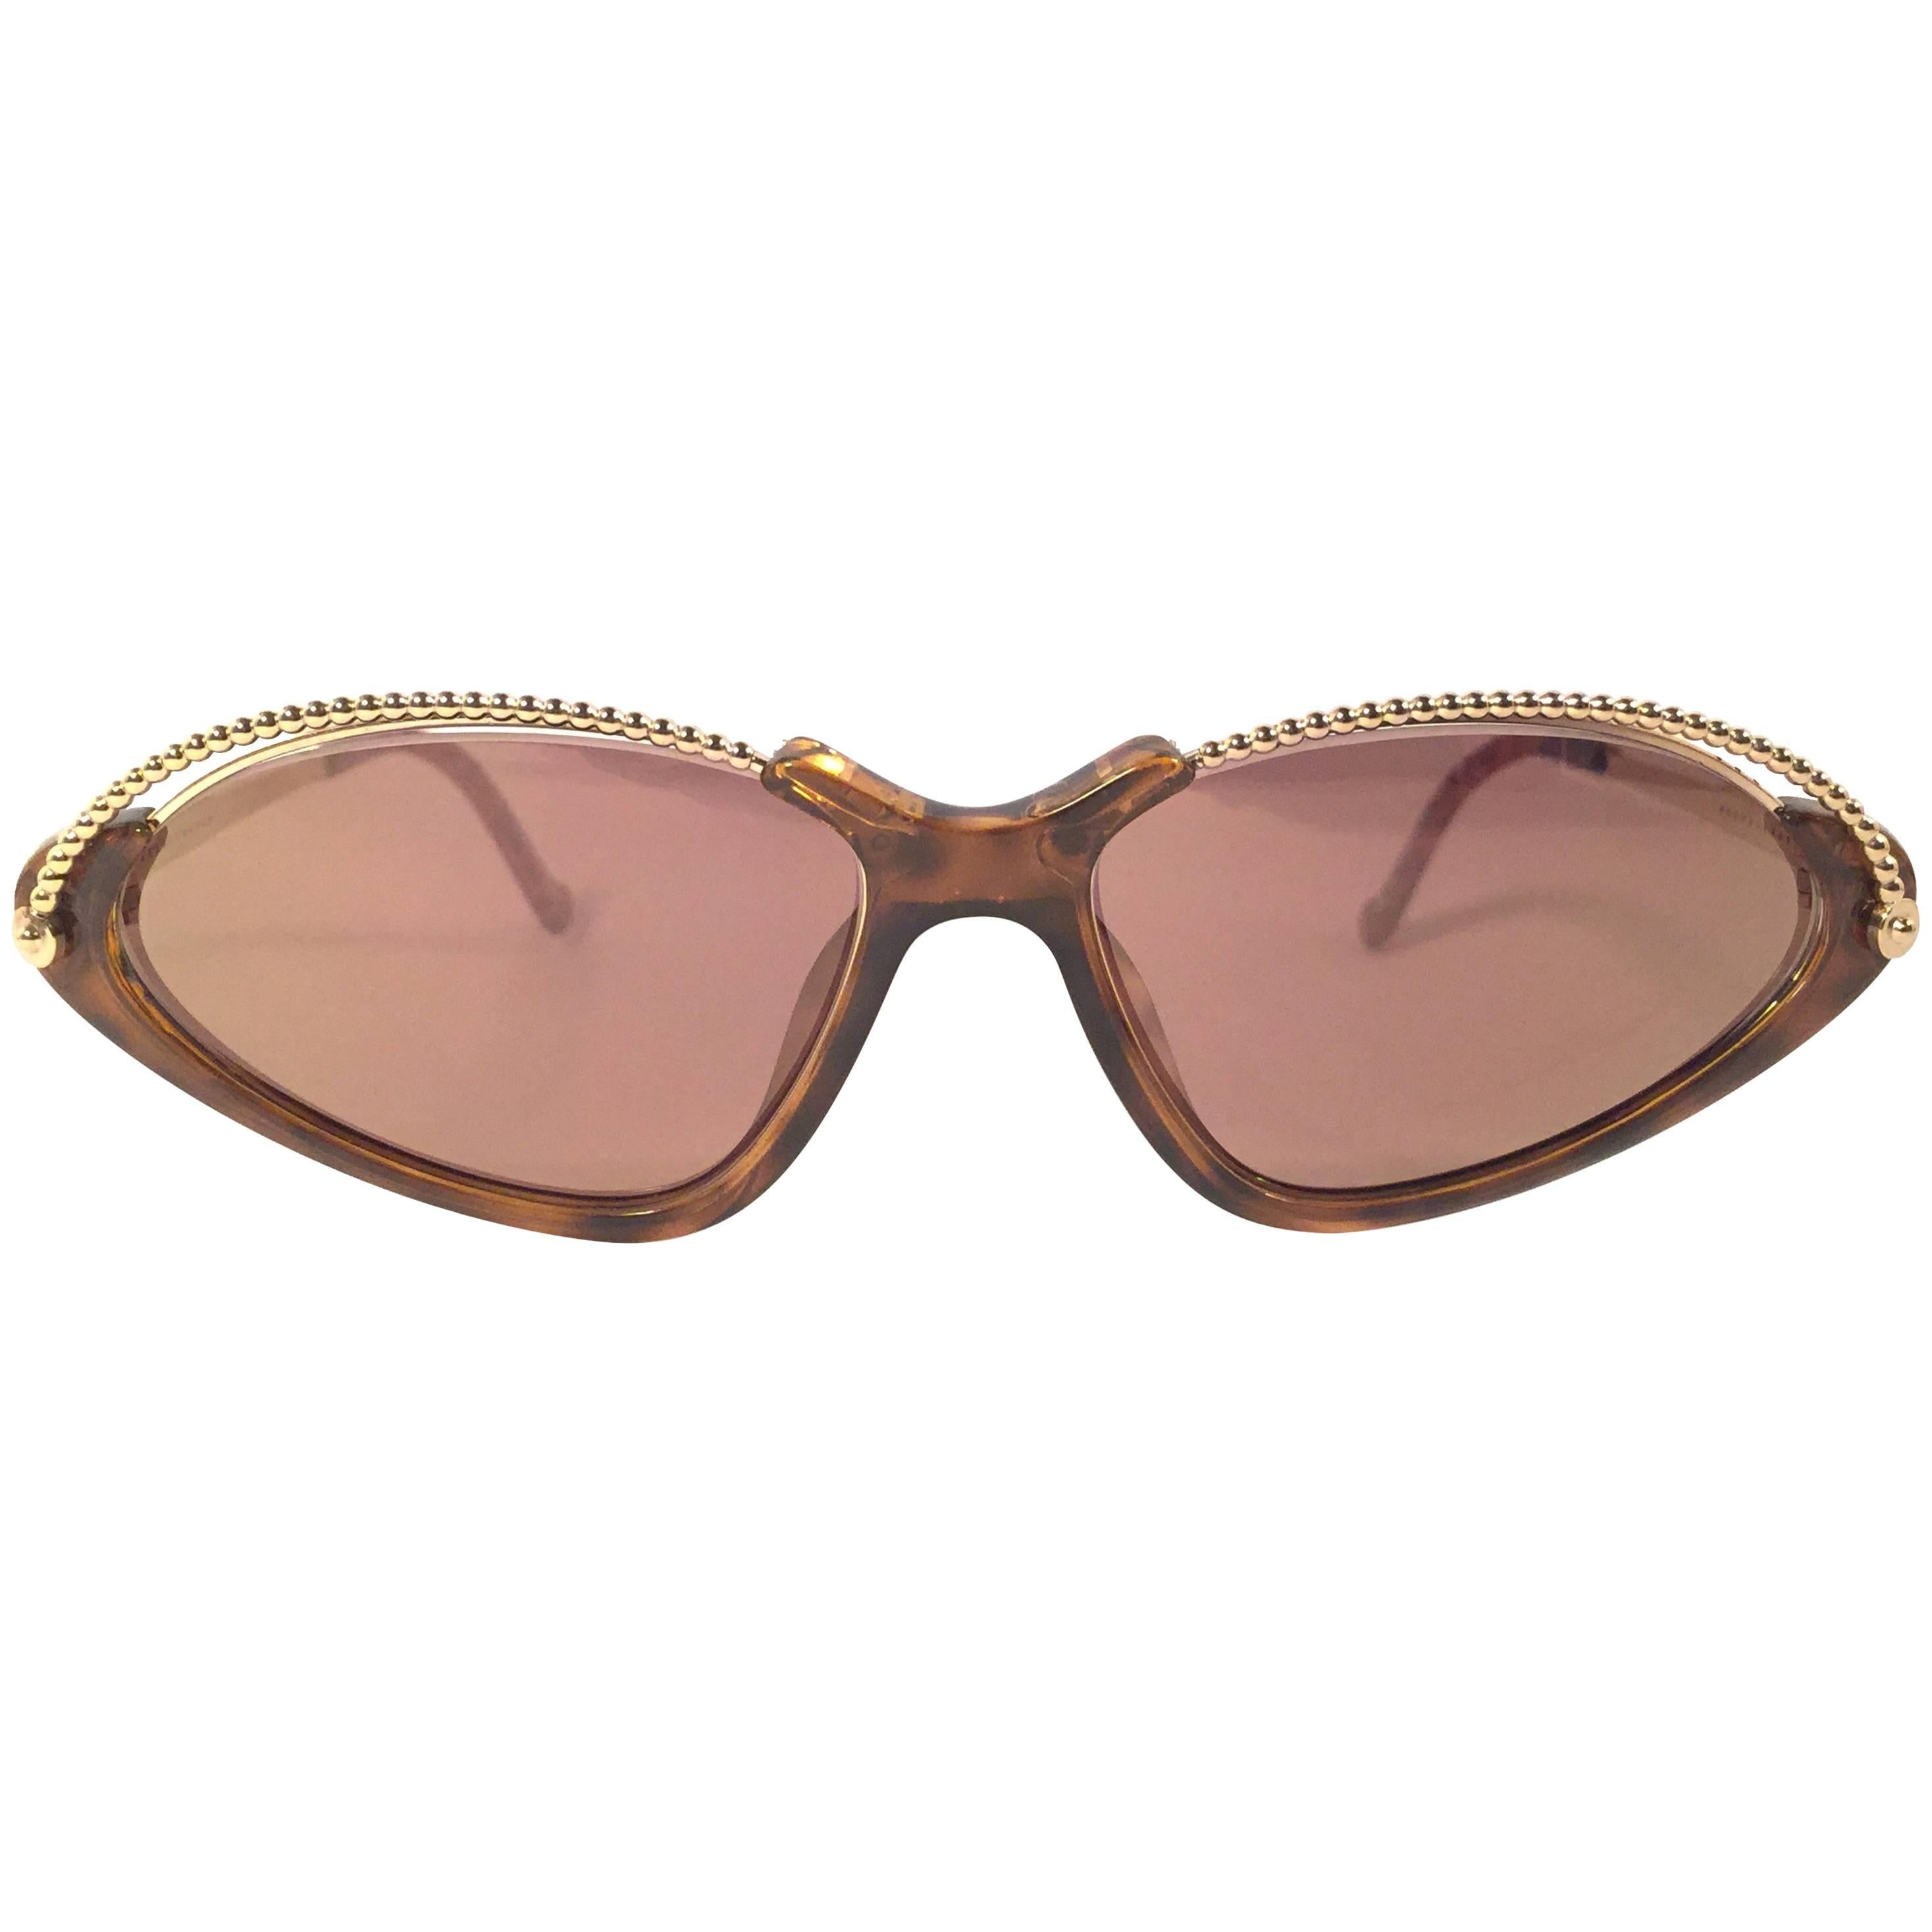 New Vintage Christian Lacroix Cat Eye 7346 1980's France Sunglasses at ...